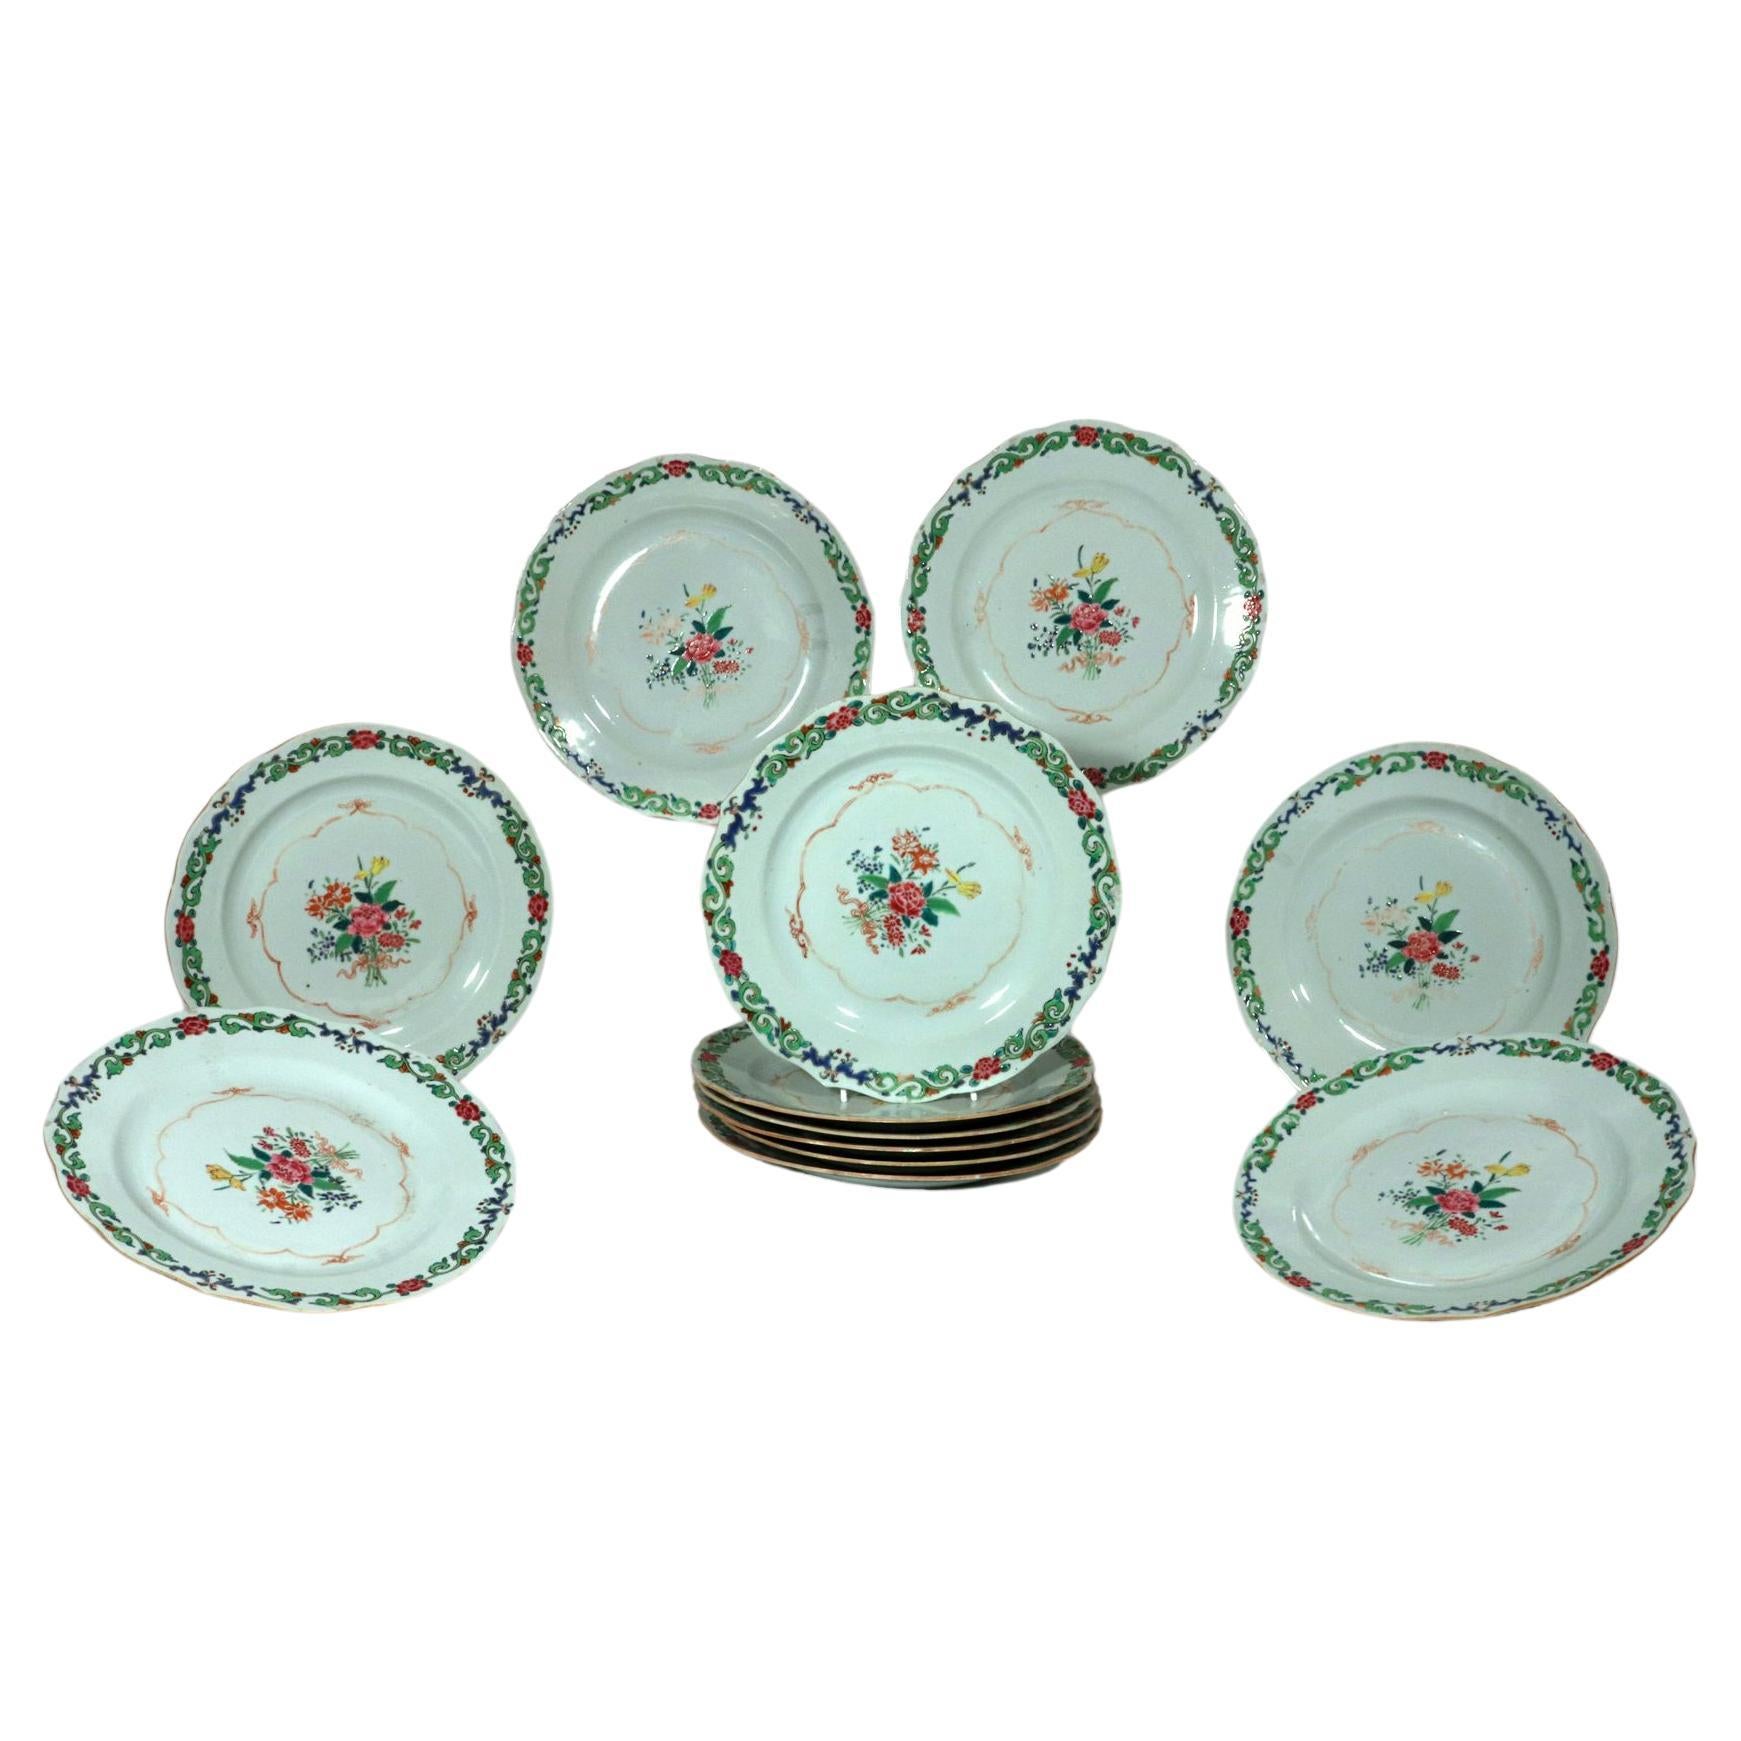 Chinese Export Famille Rose Porcelain Plates with Green Enamel, Set of Twelve